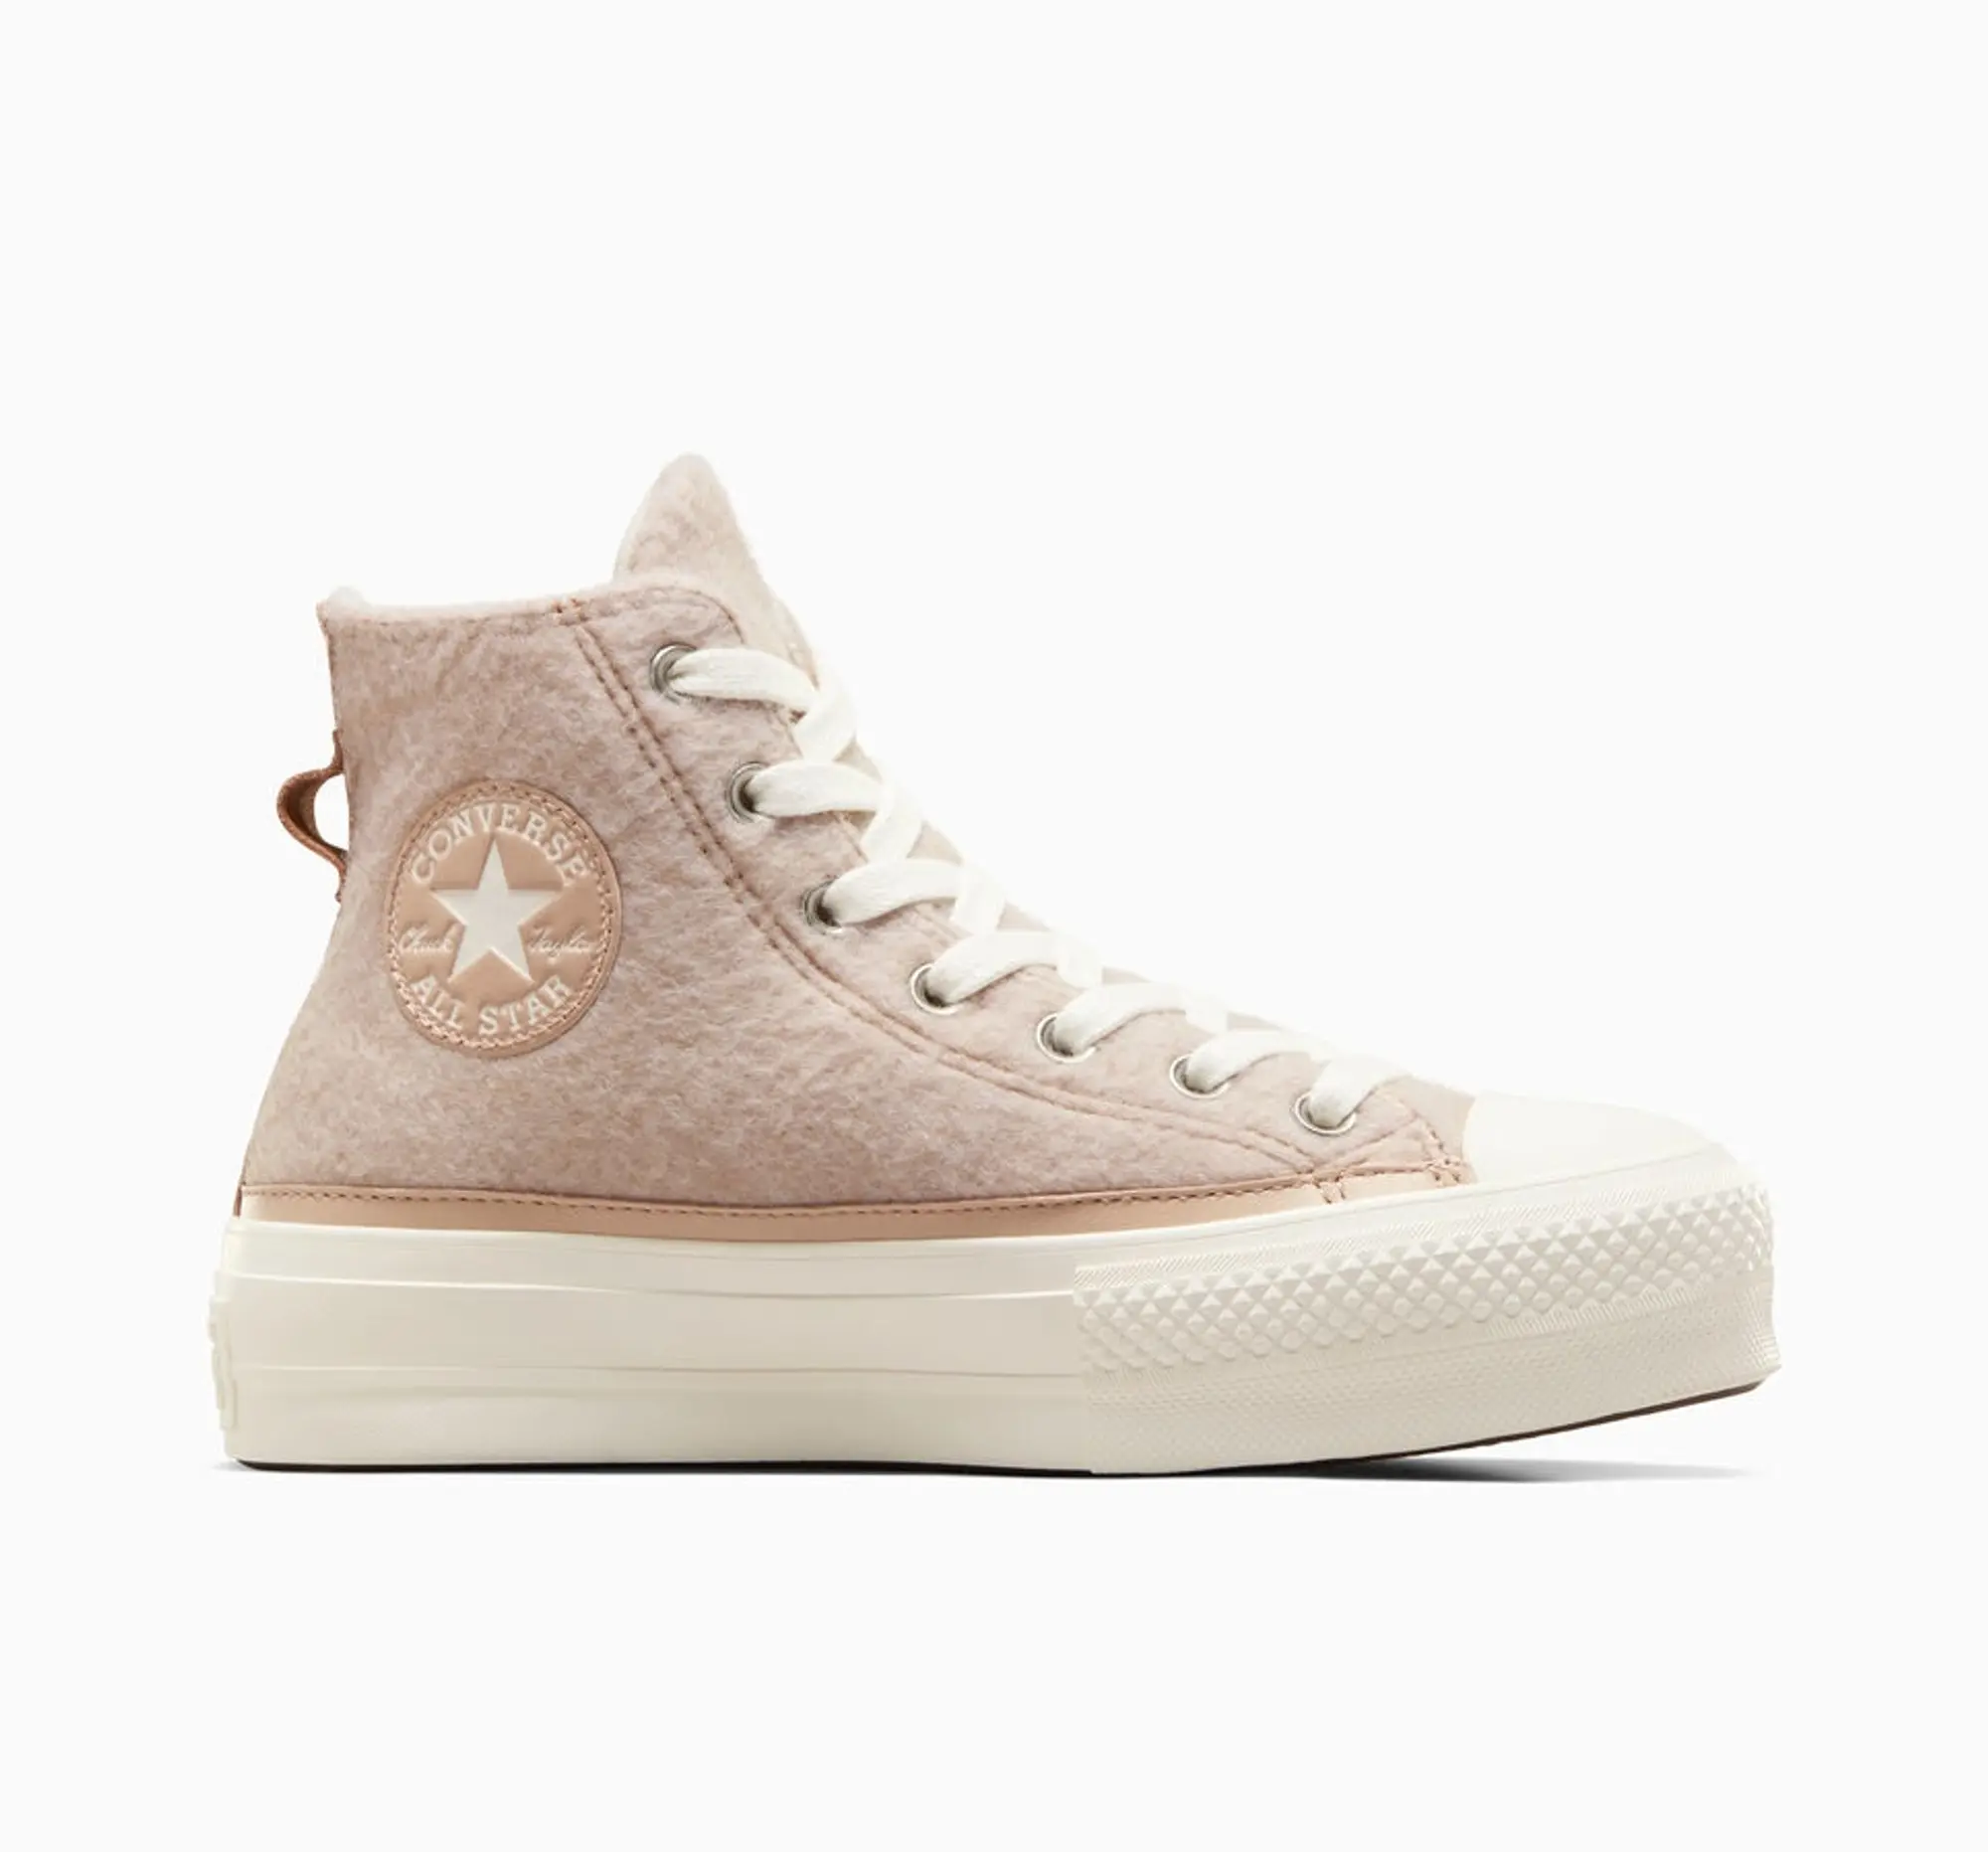 Converse all star hi winter warmers trainers in white & beige